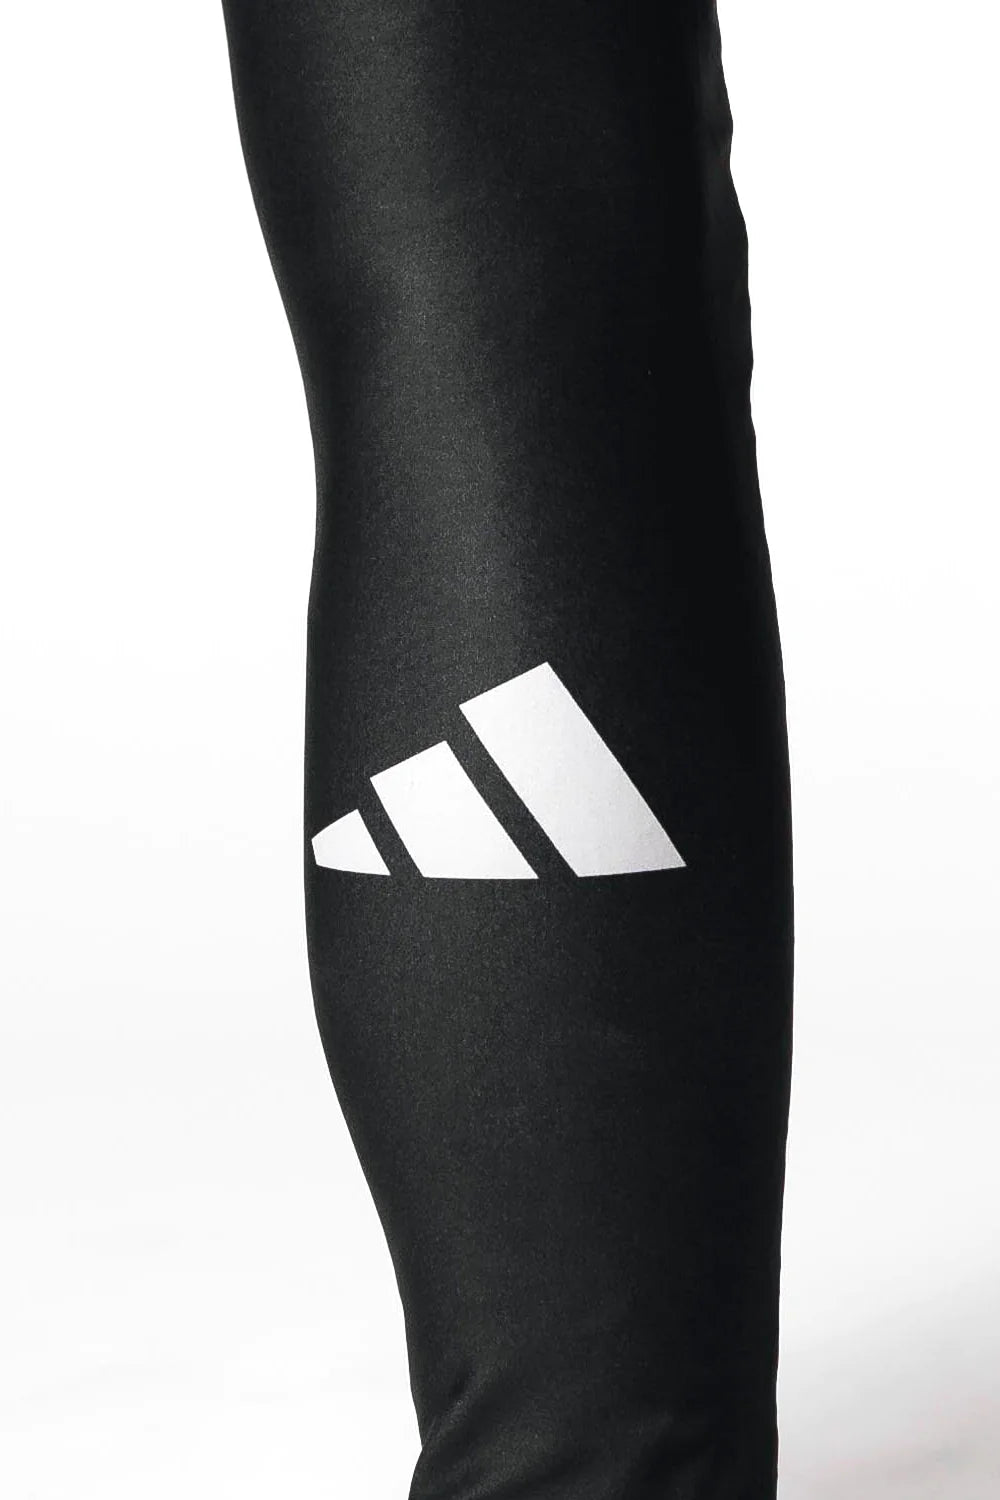 ADIDAS 3/4 compression tights, Men's Fashion, Activewear on Carousell